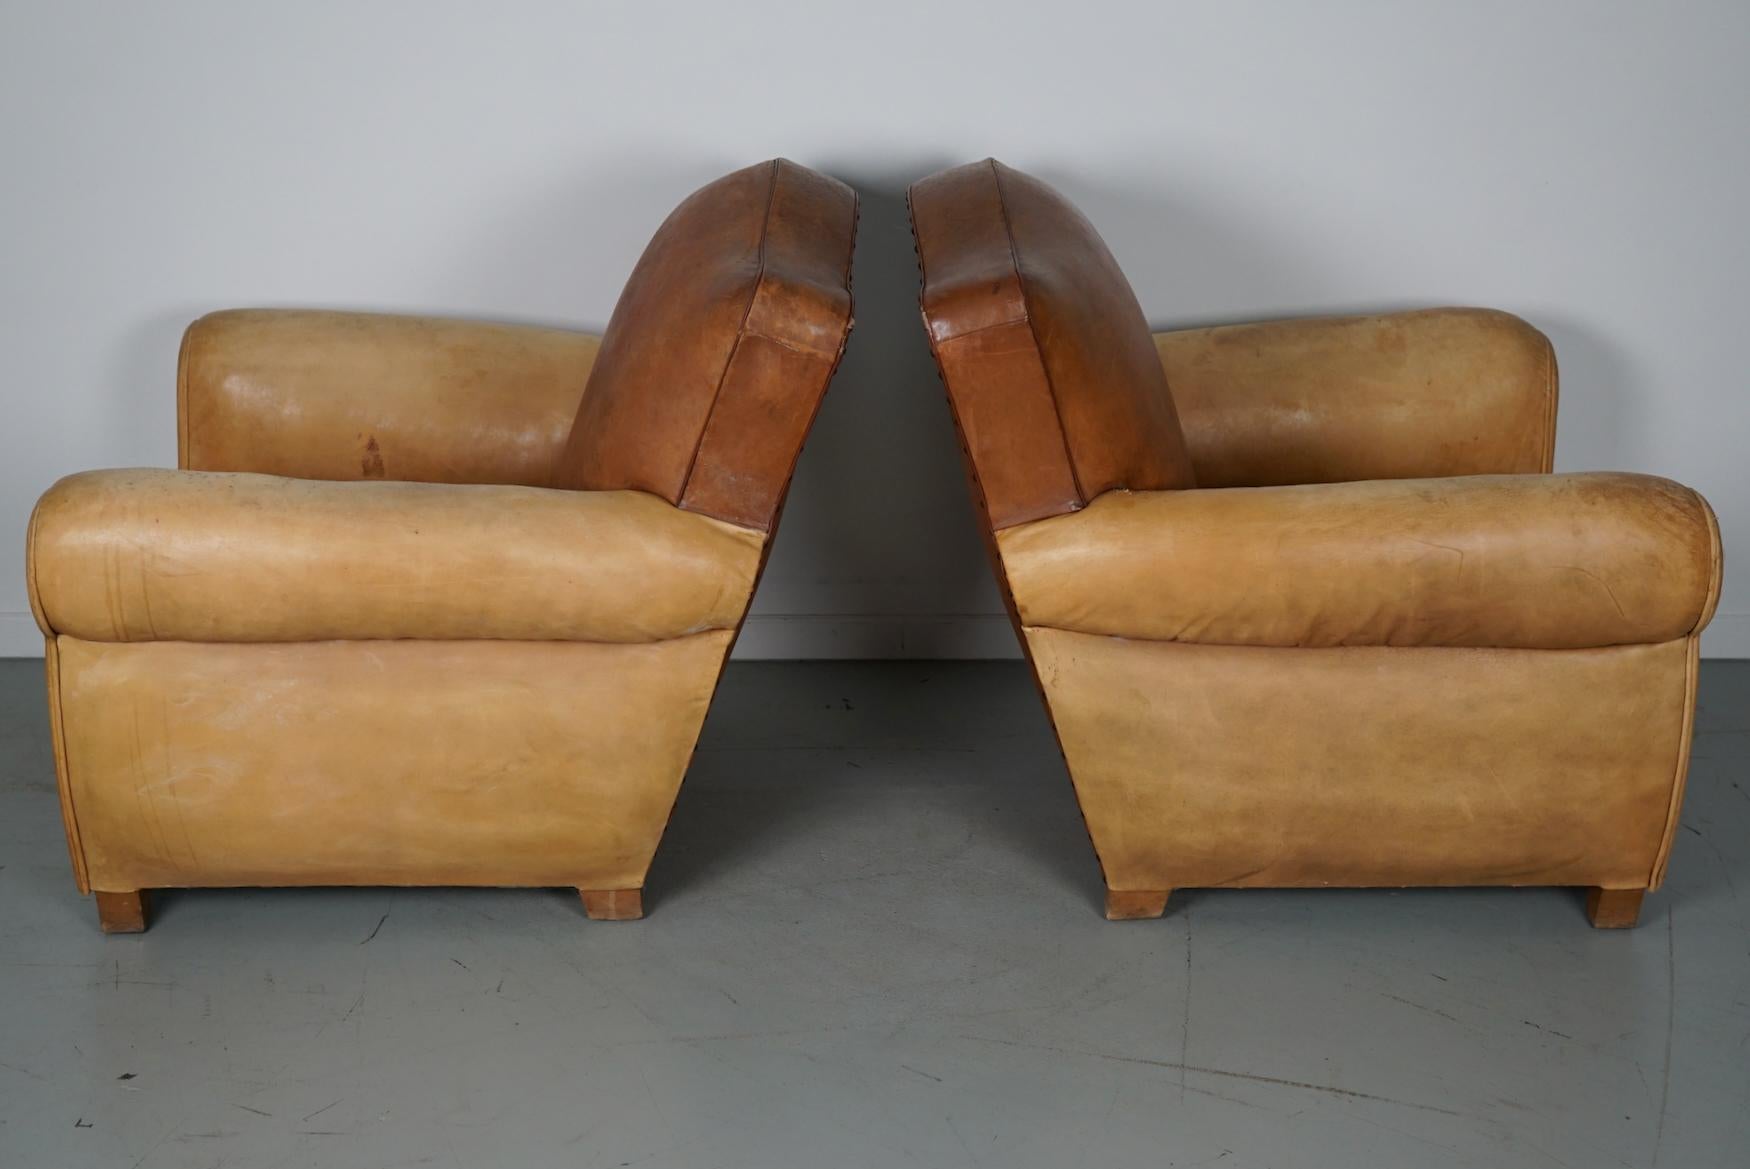  Pair of French Cognac Moustache Back Leather Club Chairs, 1940s For Sale 6